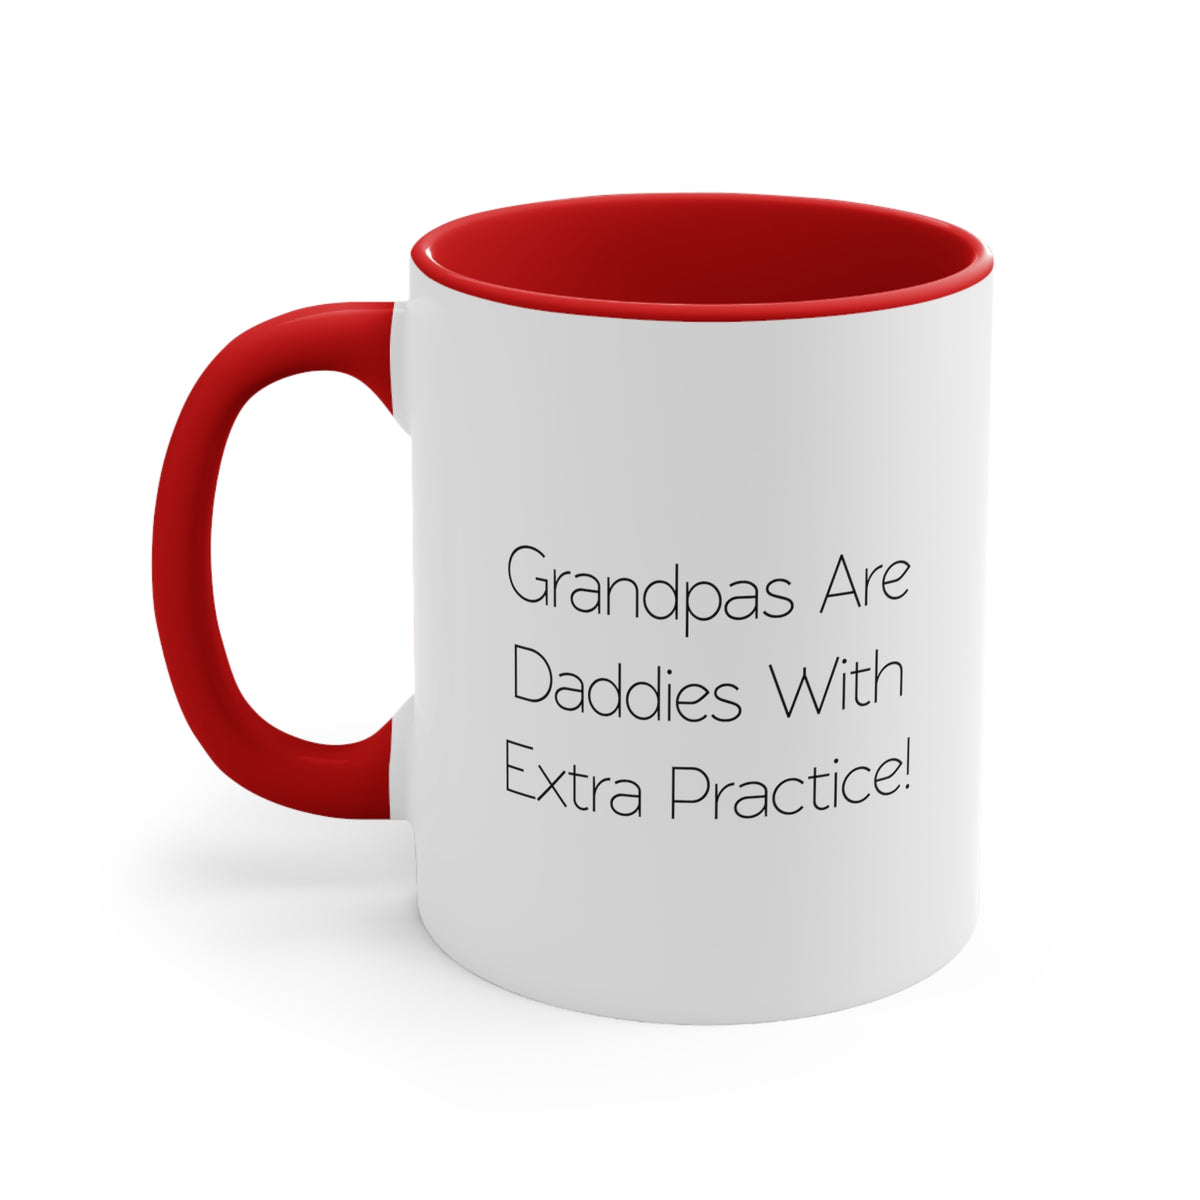 New Grandfather Two Tone 11oz Mug, Grandpas Are Daddies With Extra!, Inspirational Gifts for Grandpa from Grandson, Father Gifts, Unique gift ideas, Inexpensive gift ideas, Handmade gift ideas